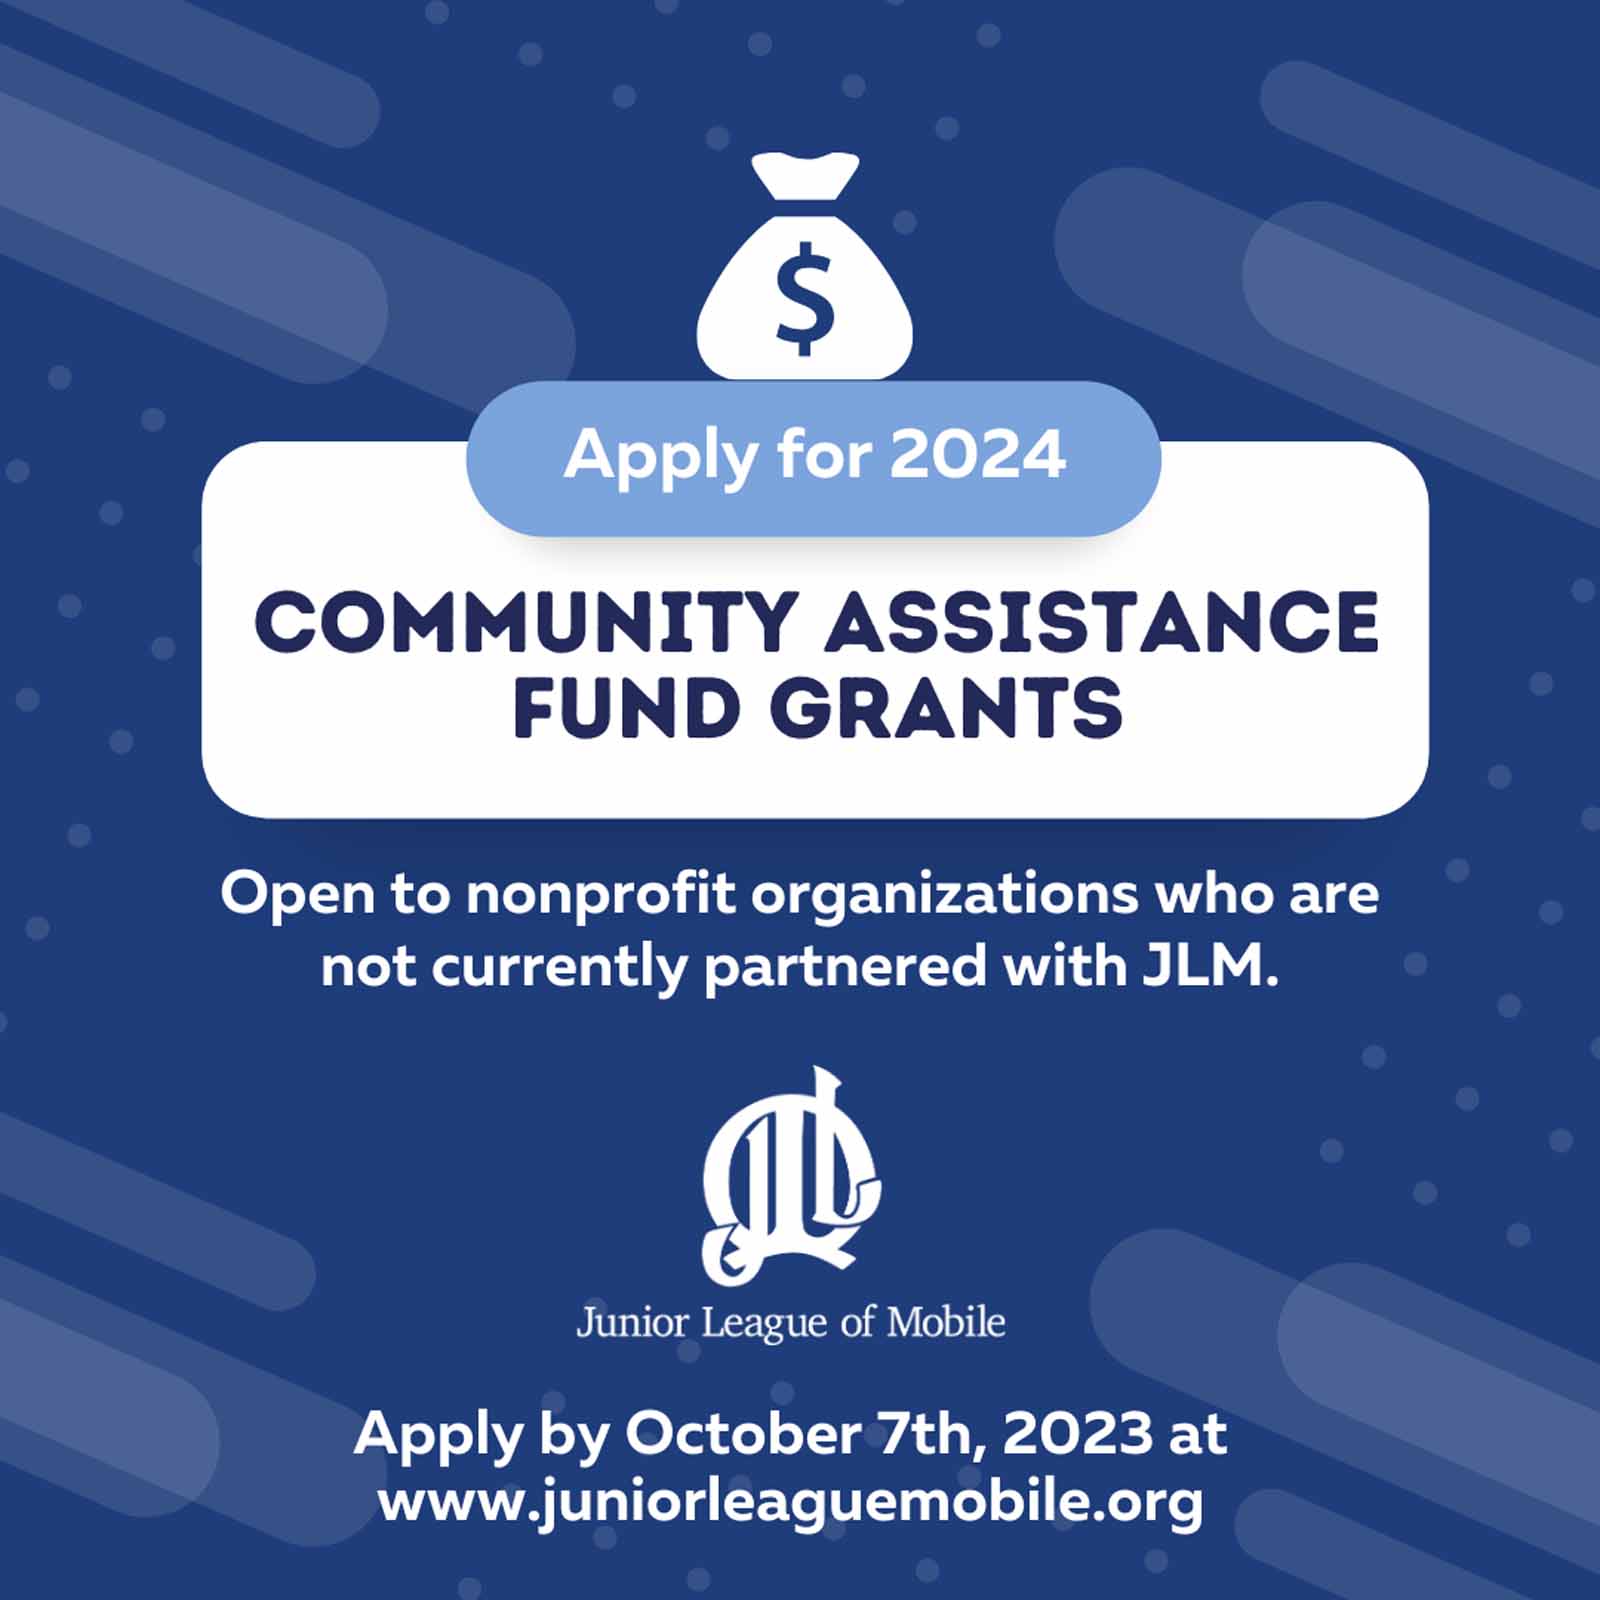 JLM Taking Community Assistance Fund Applications